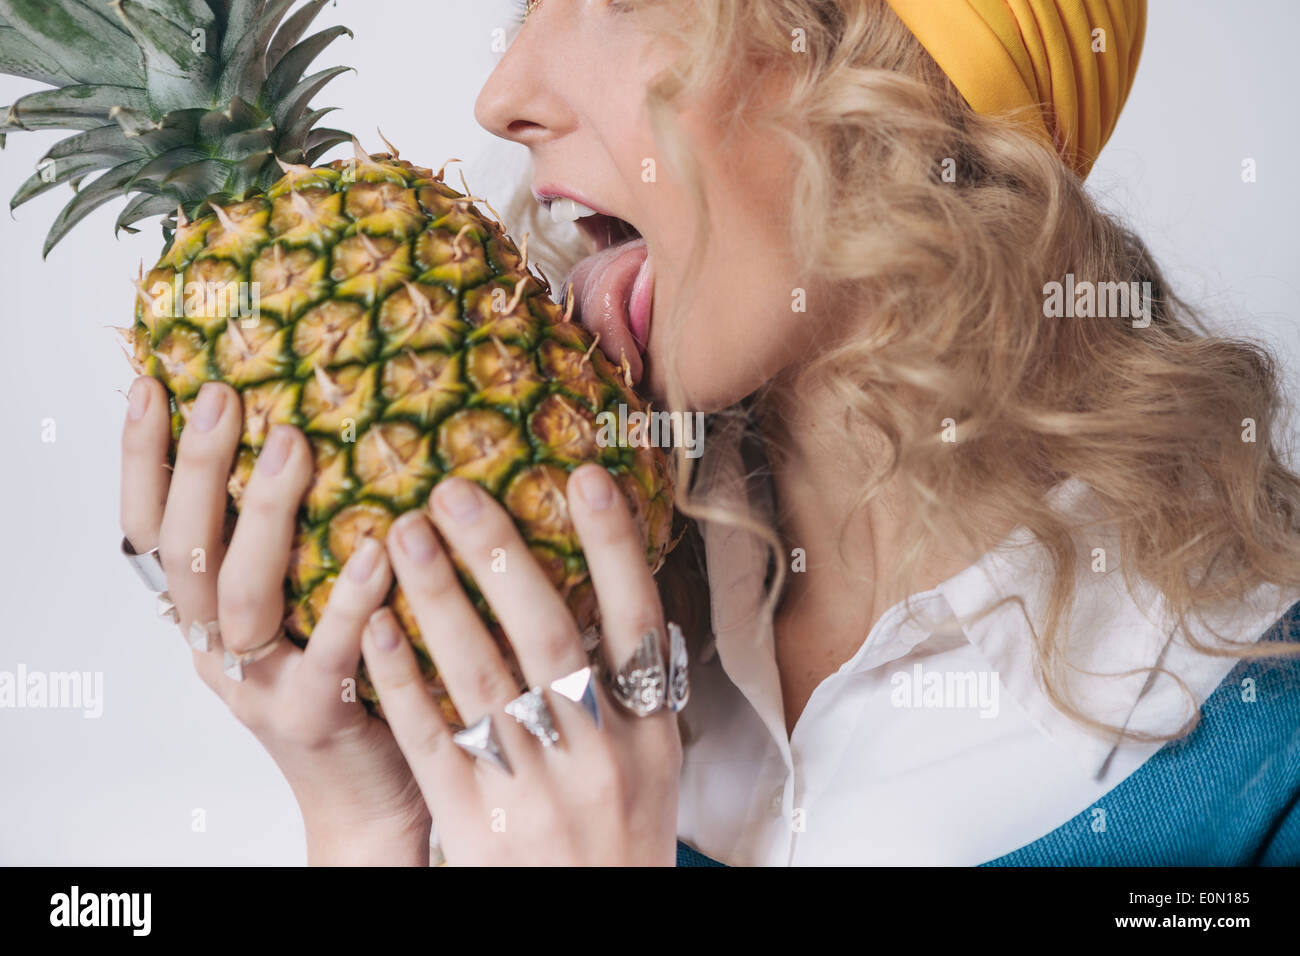 Concept of young woman loving pineapple so much she licks it like one would ice cream. Stock Photo